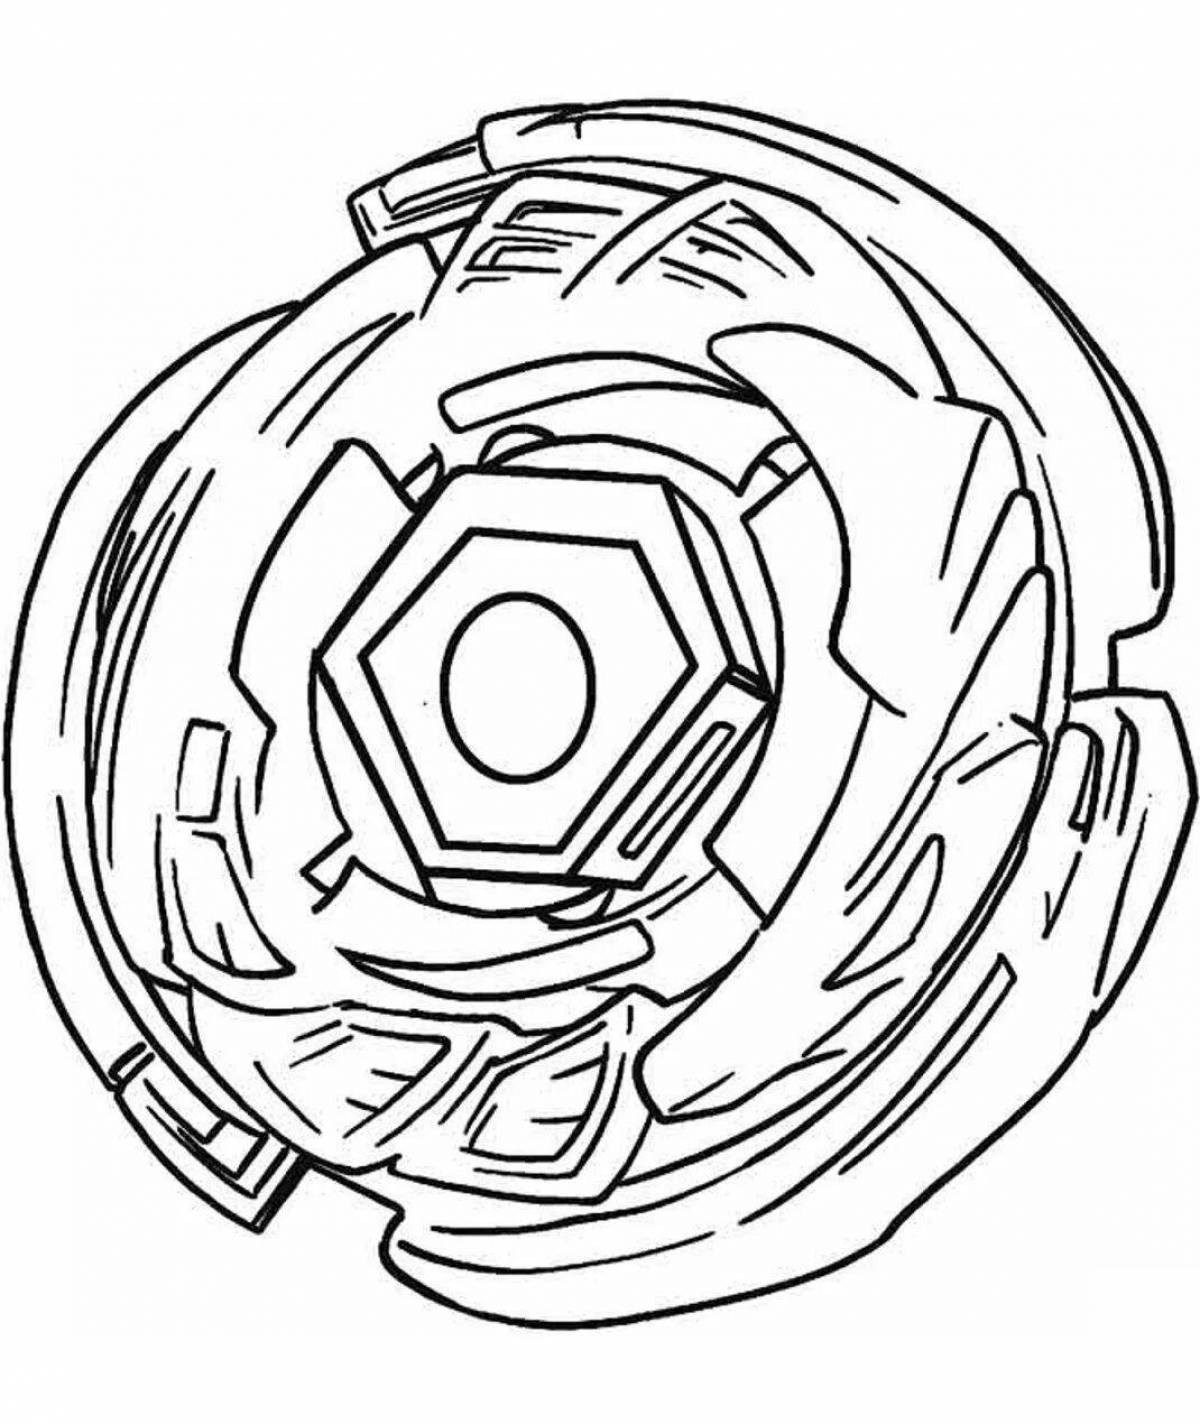 Lovely beyblade coloring page